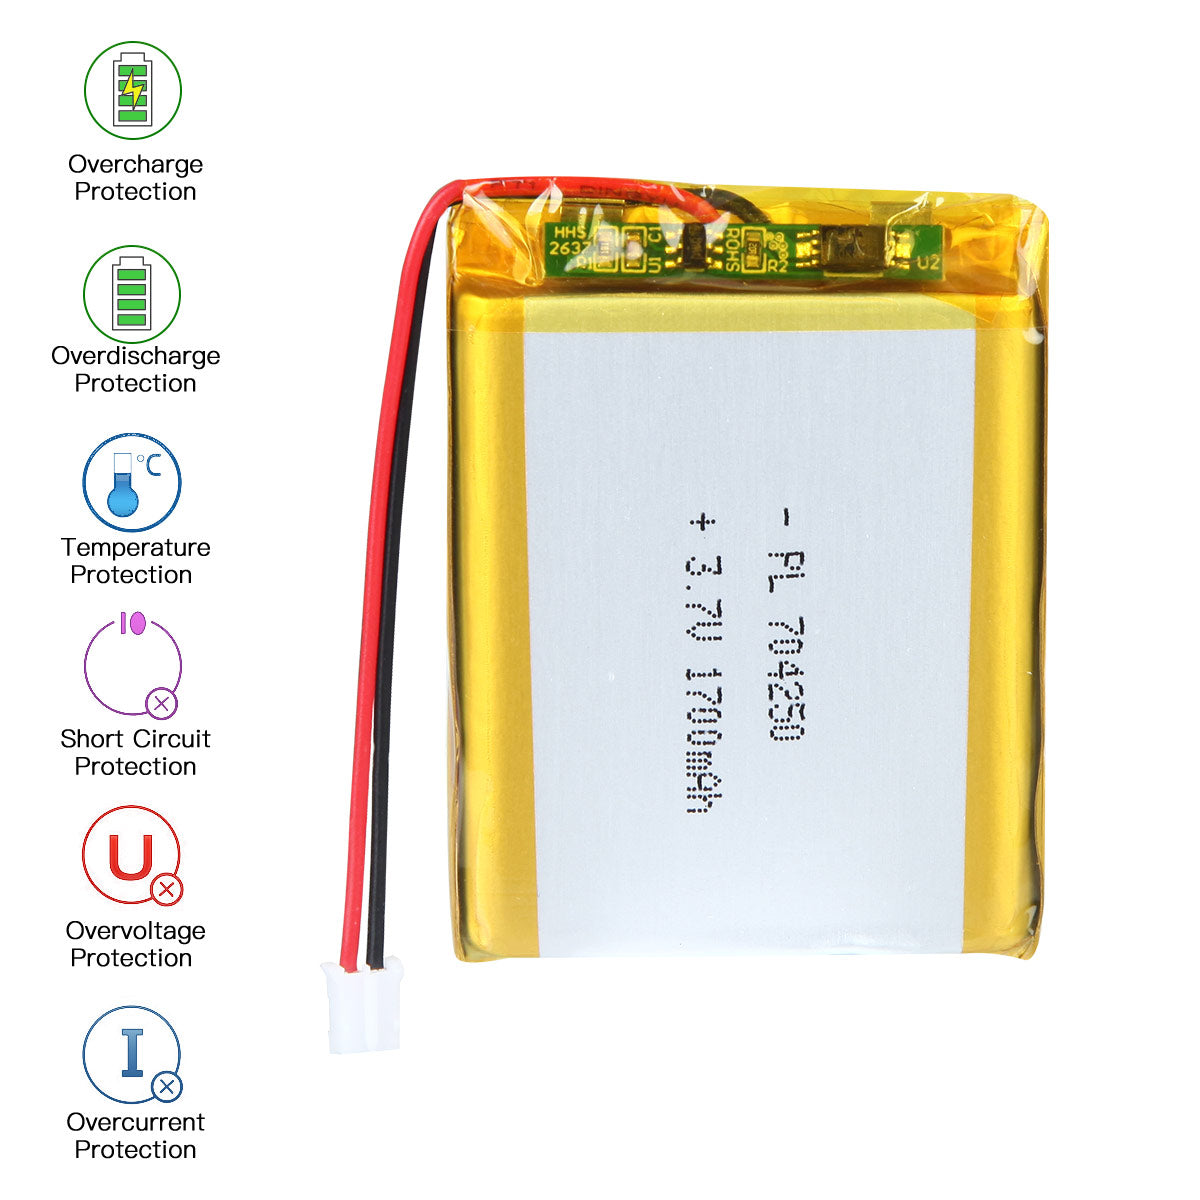 YDL 3.7V 1700mAh 704250 Lithium Polymer Battery Rechargeable Lithium Polymer ion Battery Pack